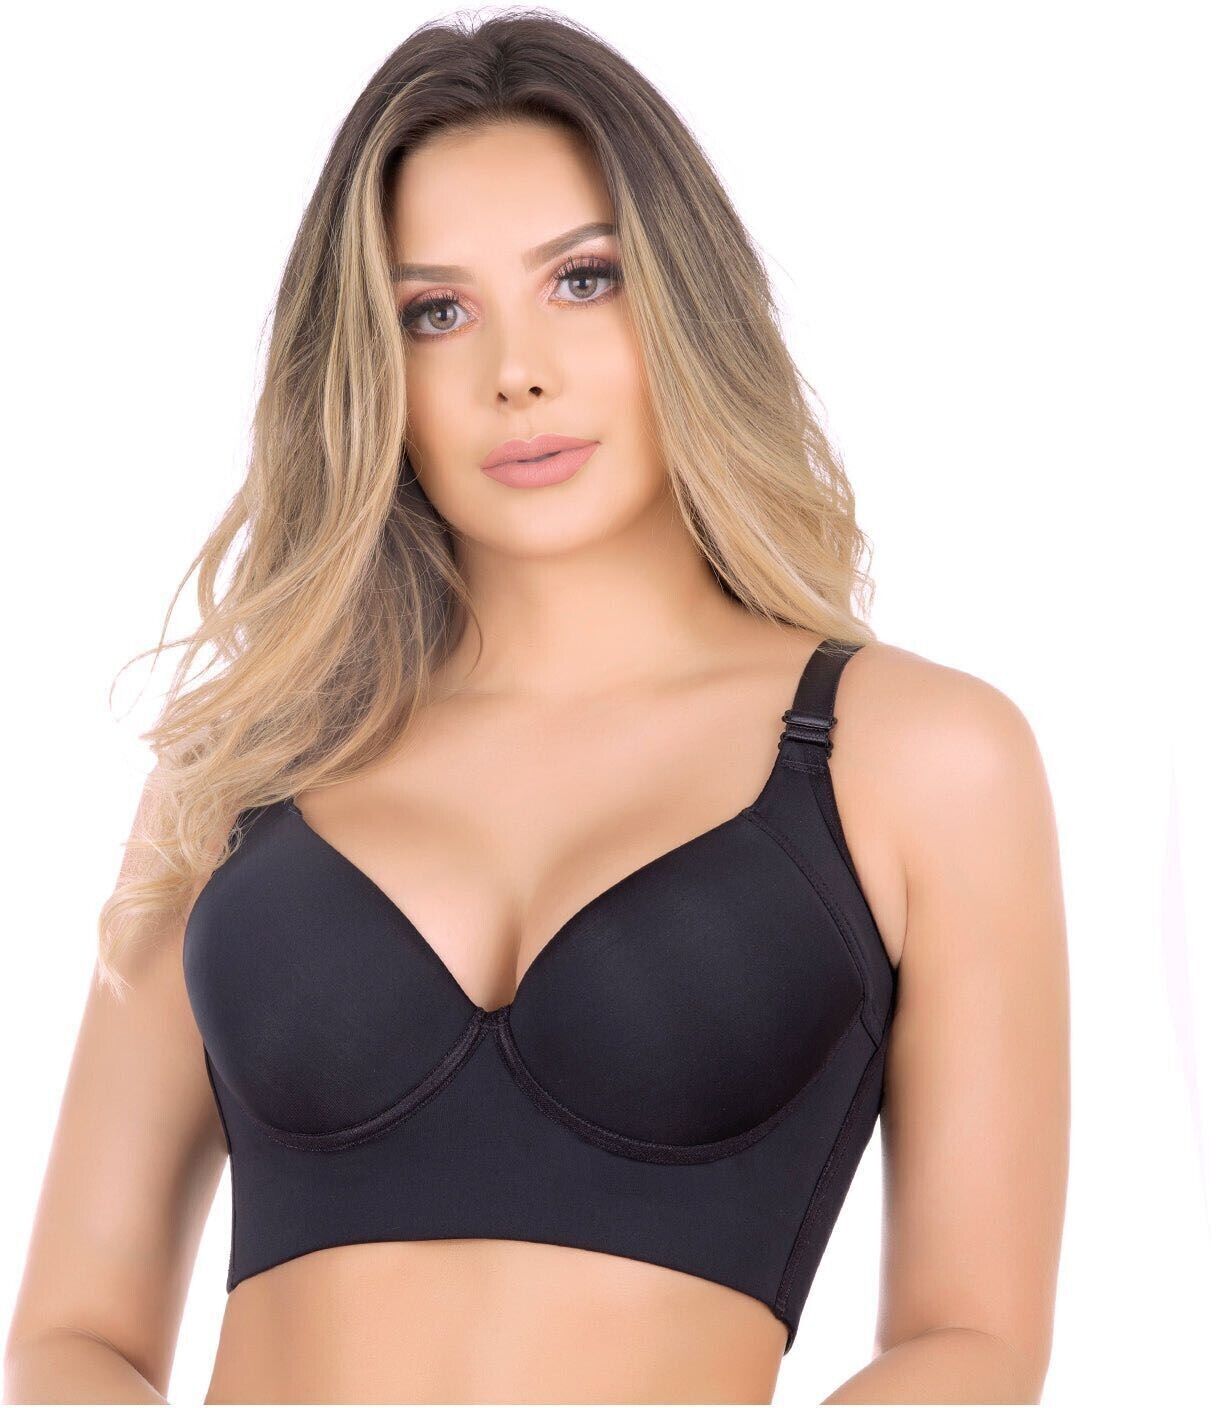 UpLady Extra Firm High Compression Full Cup Push Up Bra/38DD - Cocoa SALE